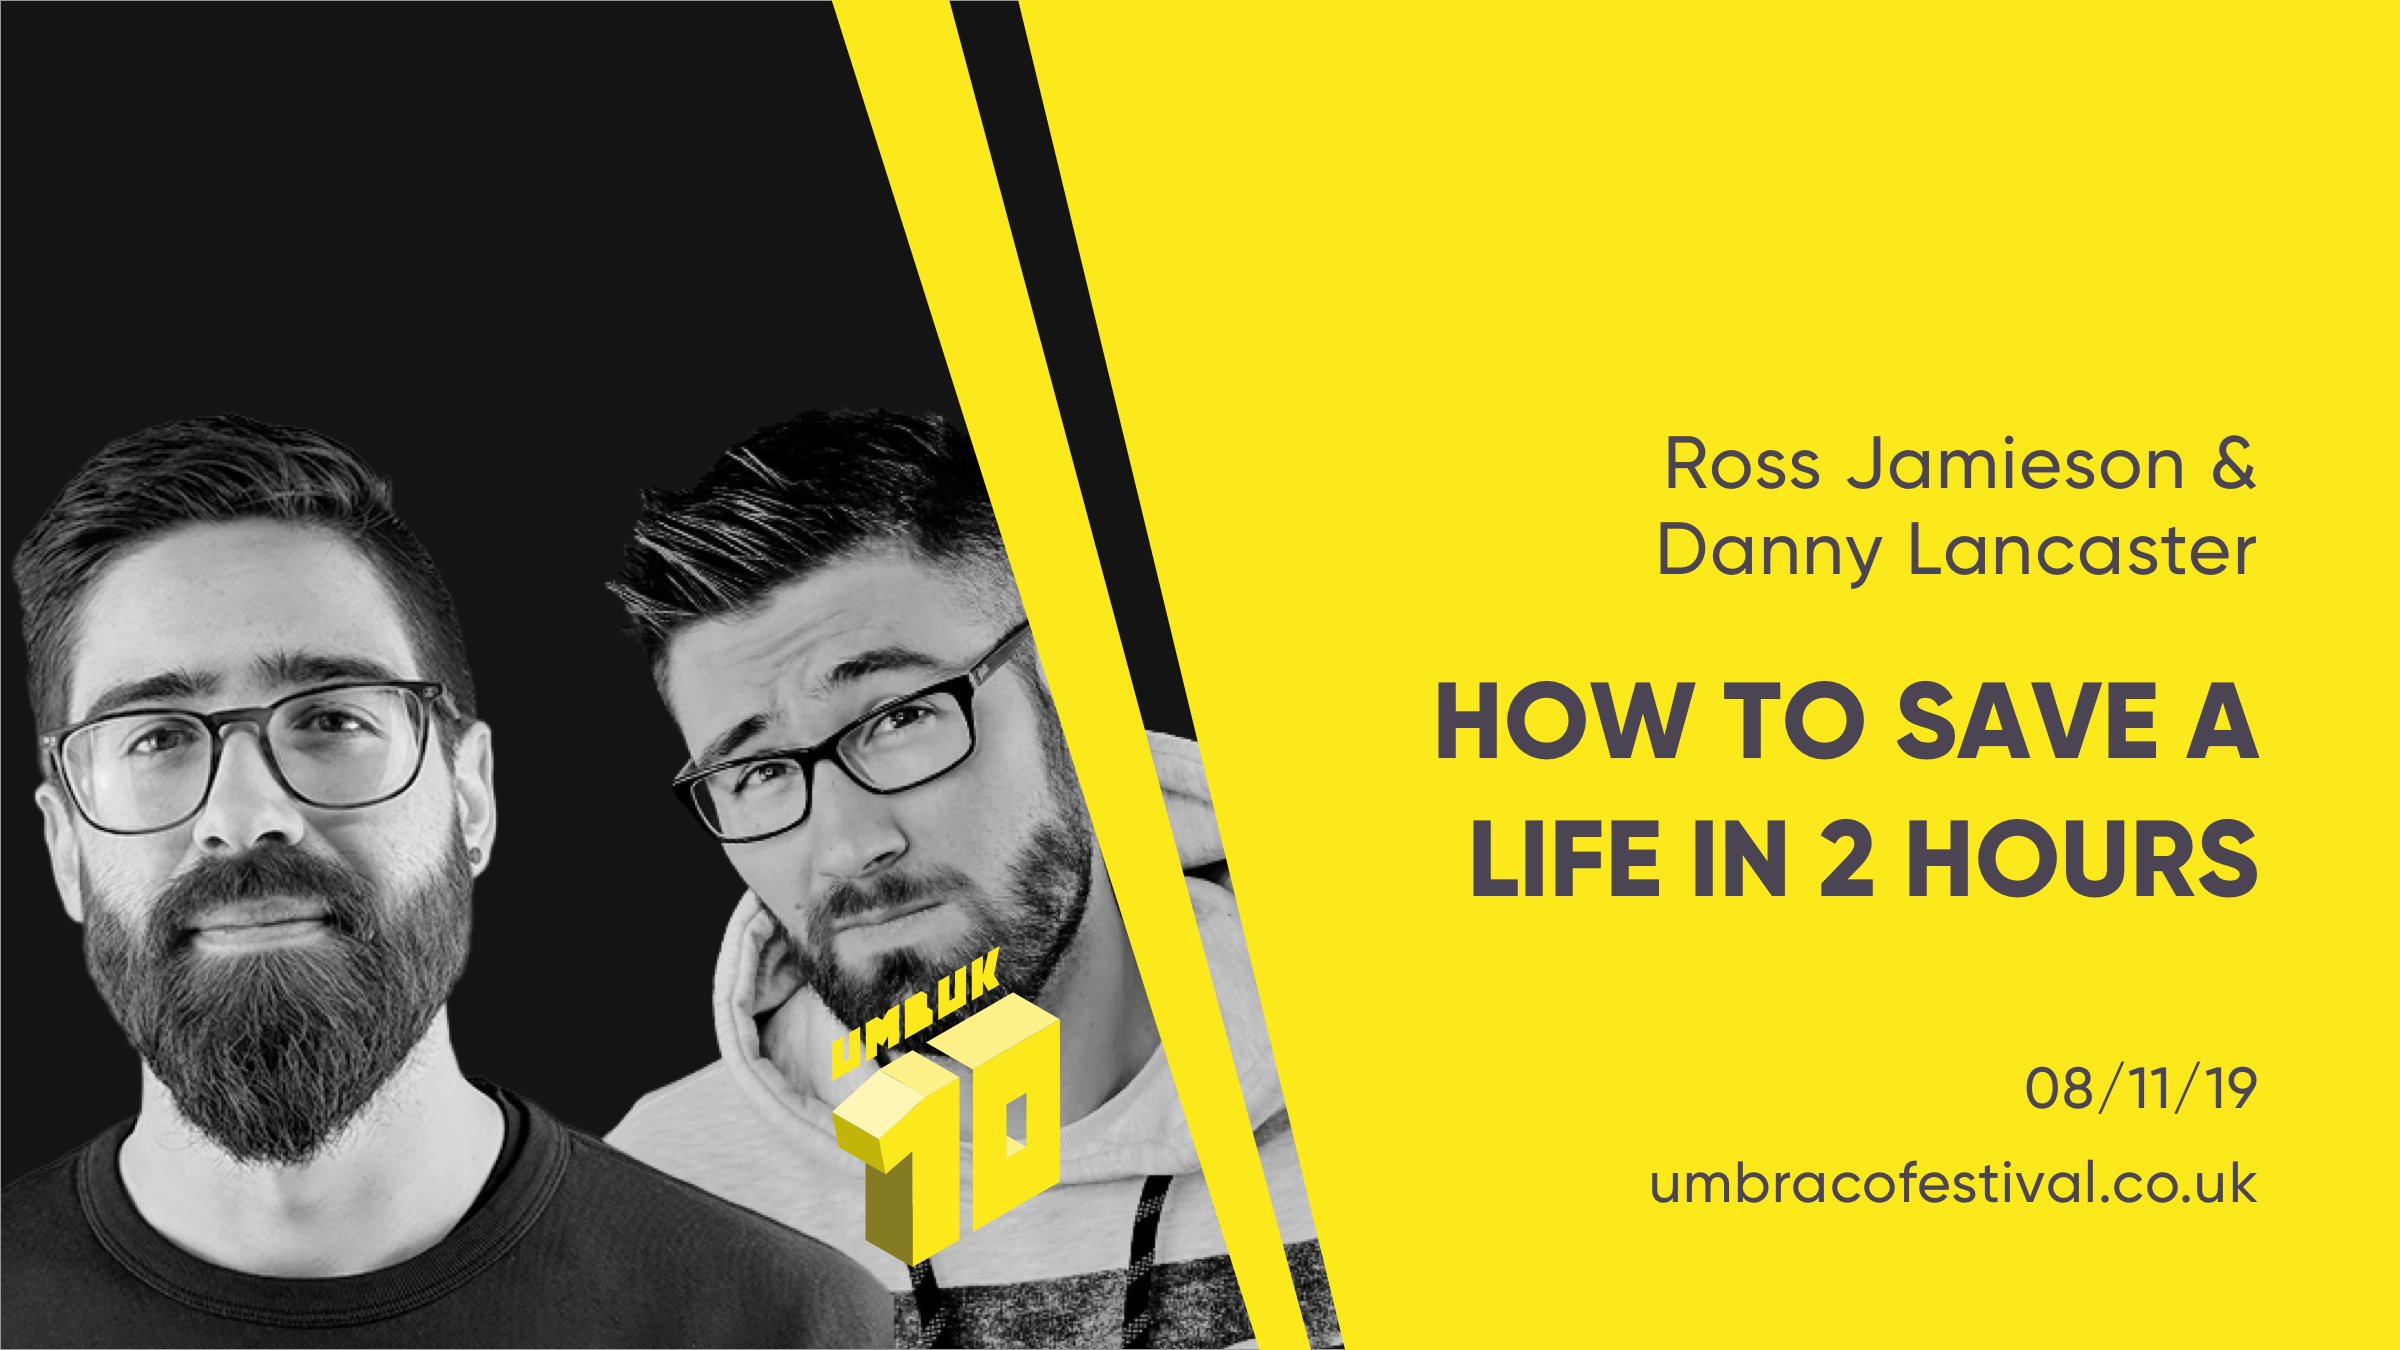 How To Save A Life In 2 Hours promotional content with Danny Lancaster and Ross Jamieson for Umbraco UK Festival